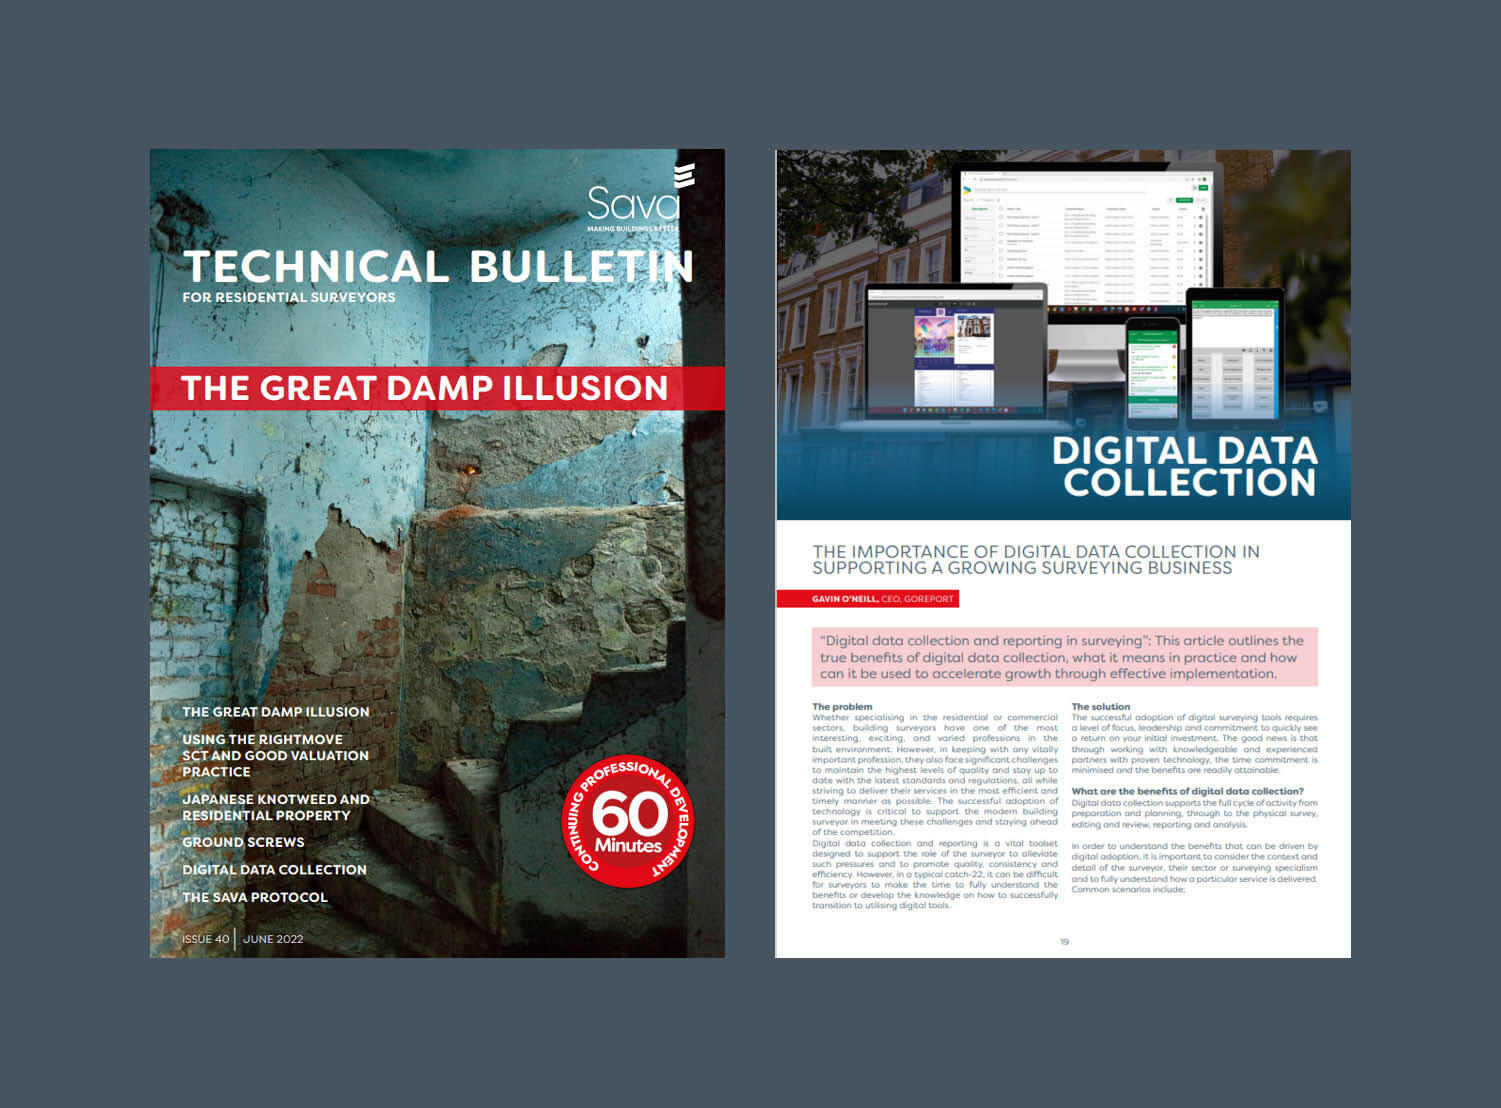 Sava Technical Bulletin: The importance of digital data collection in supporting a growing surveying business.